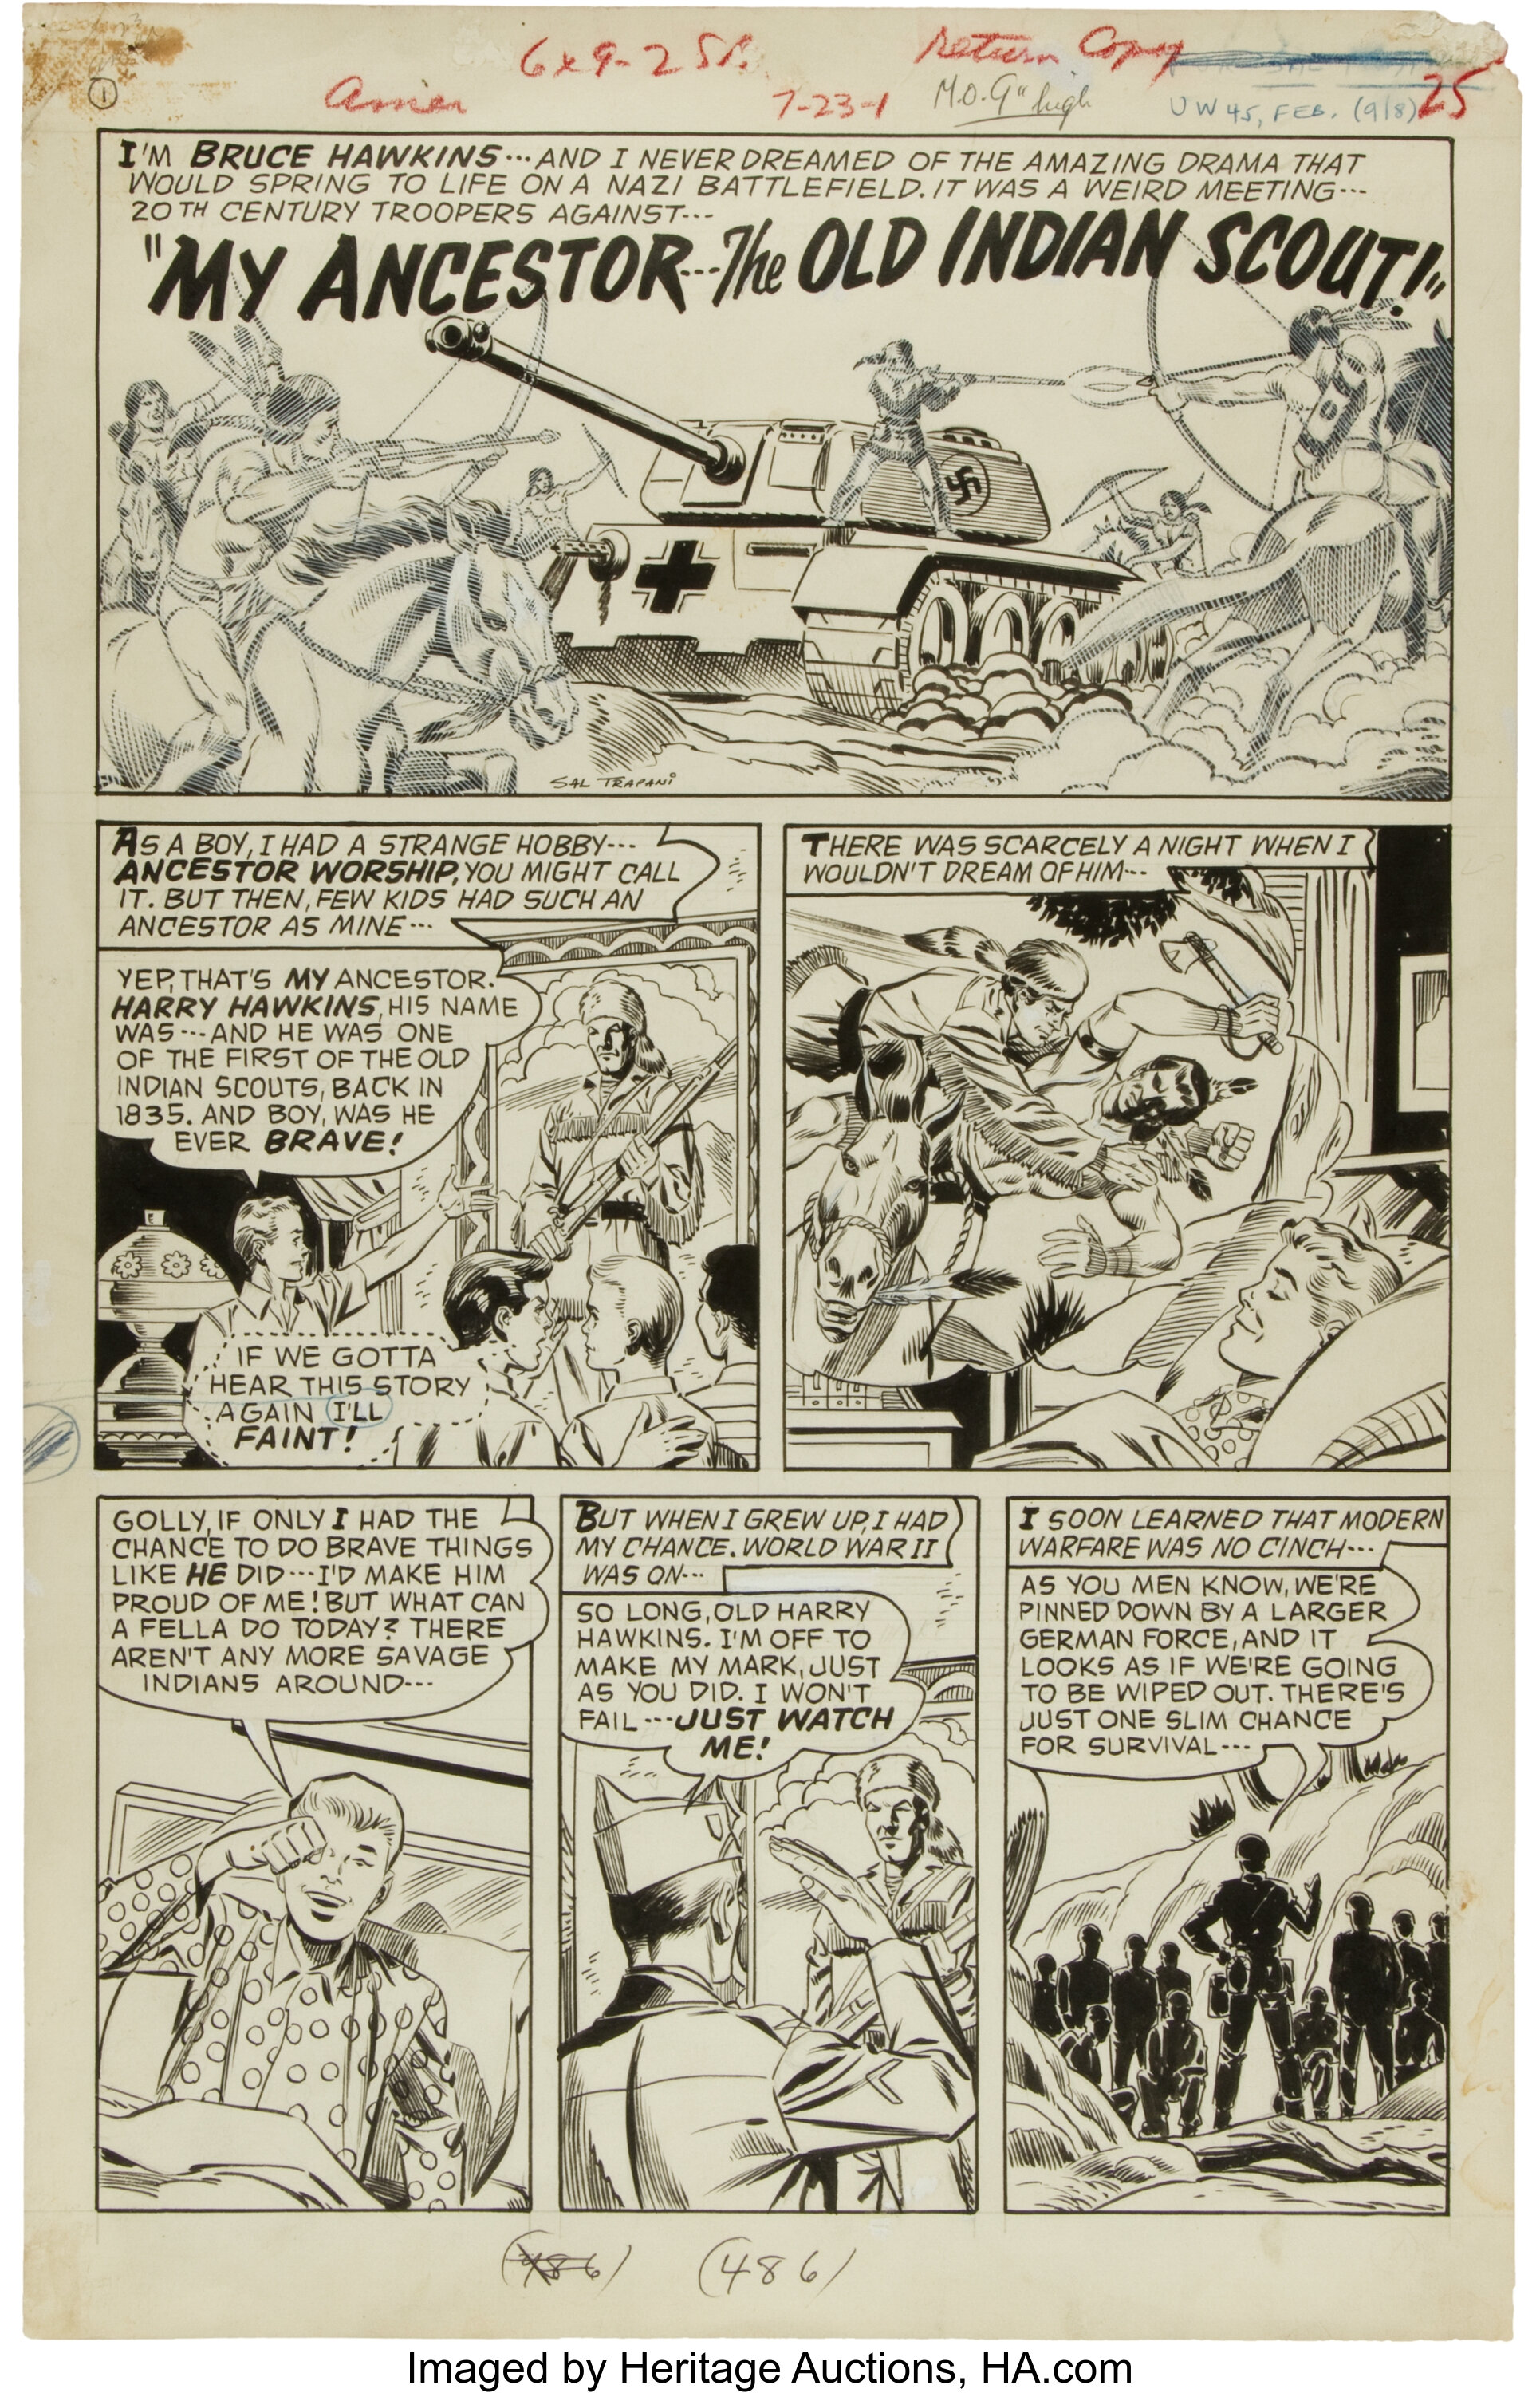 Steve Ditko And Sal Trapani Unknown Worlds 45 Page 1 Original Art Lot Heritage Auctions